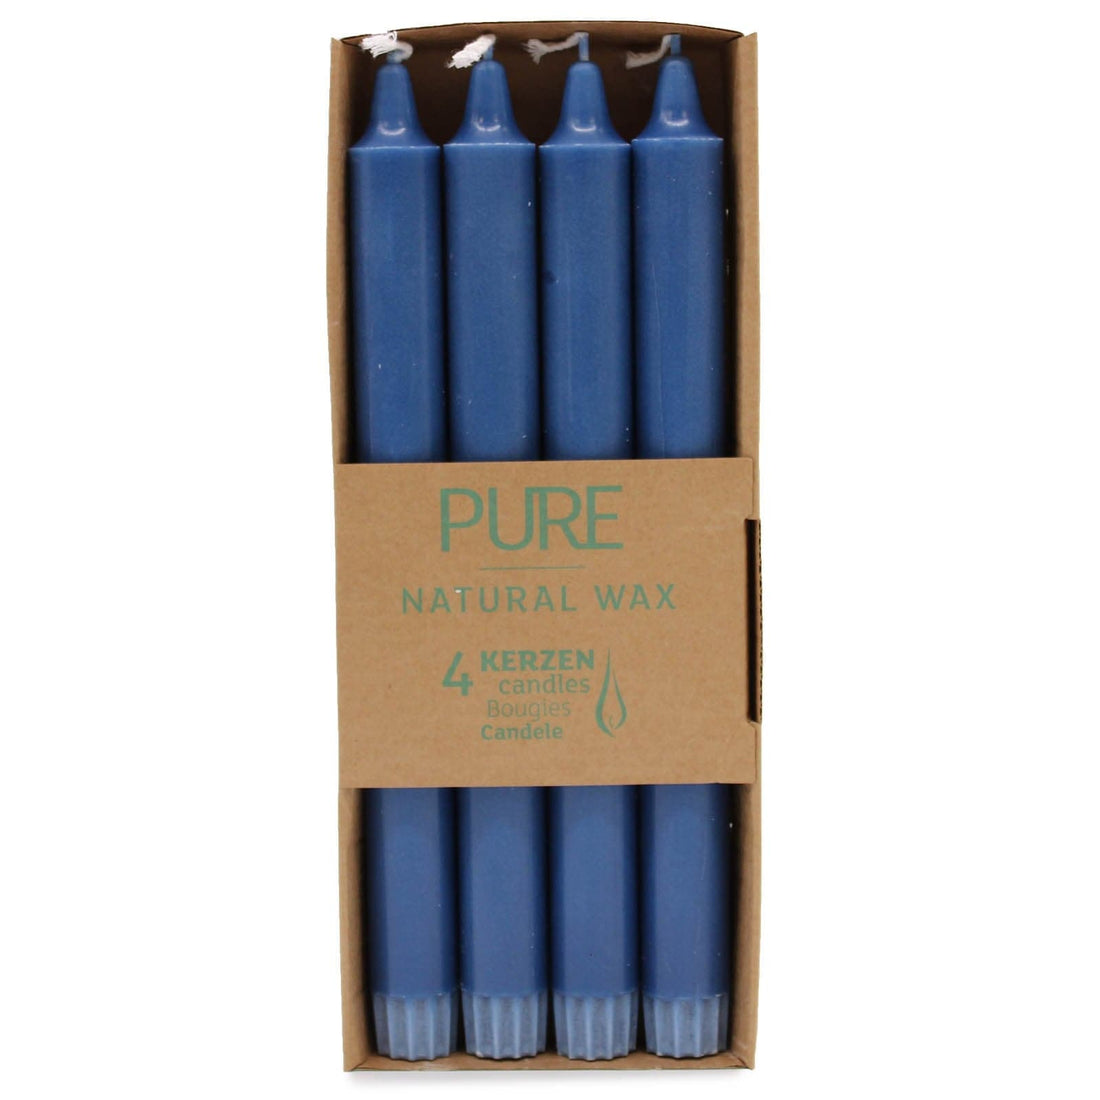 Pure Natural Wax Dinner Candle 25x2.3 - Blue - best price from Maltashopper.com PUREC-08